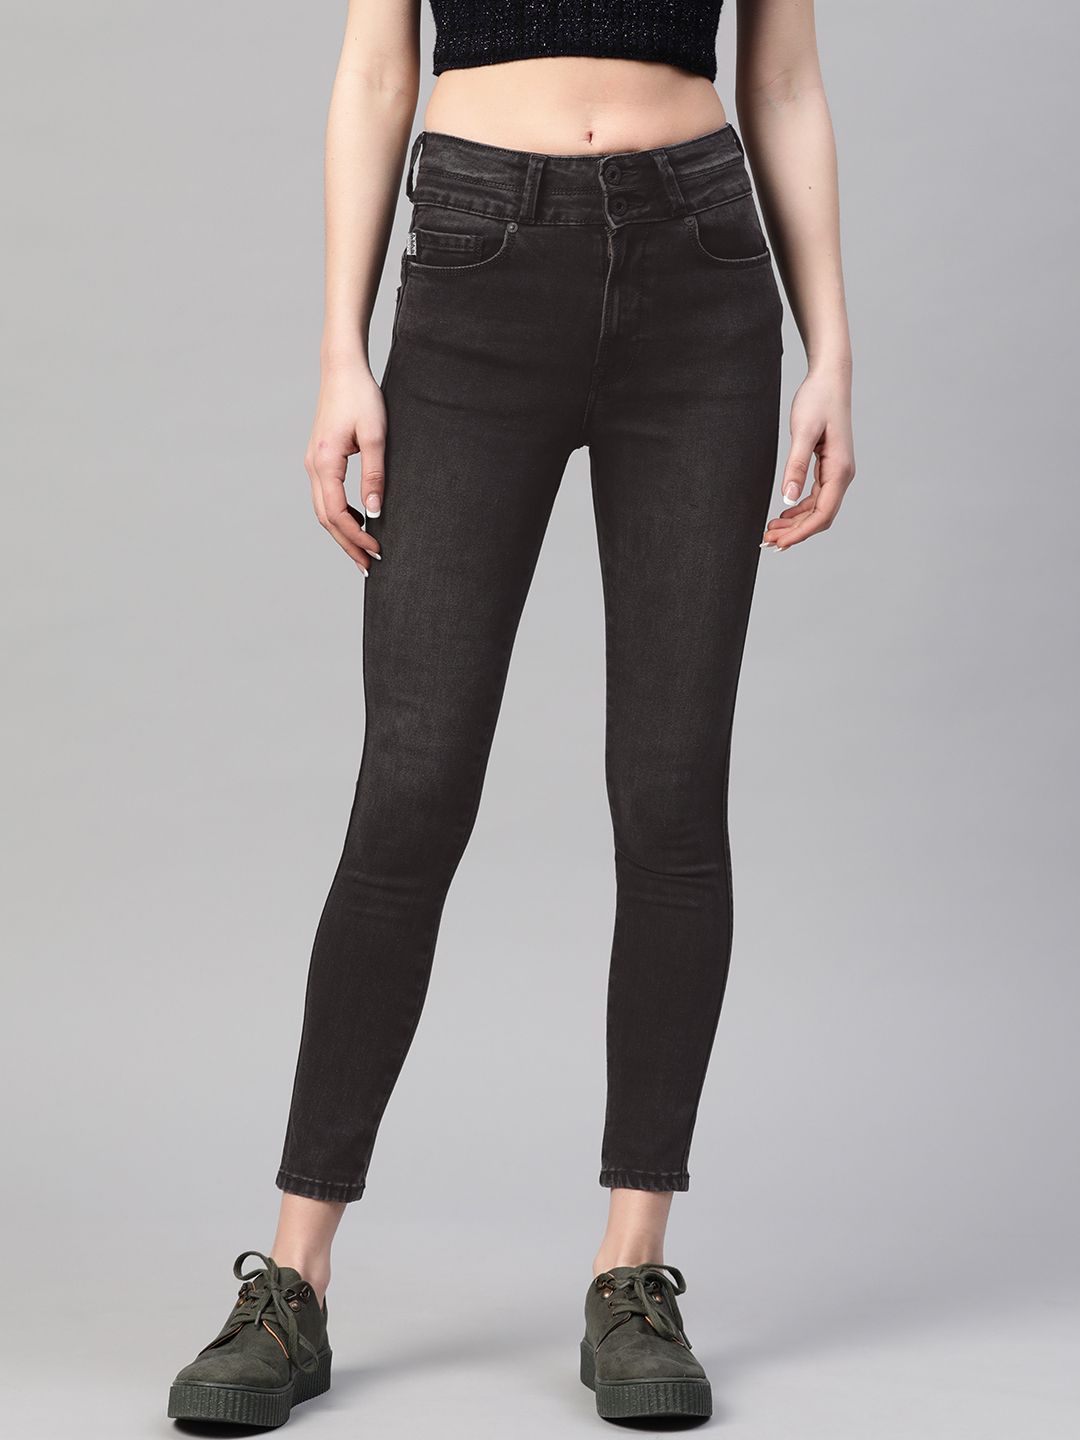 Pepe Jeans Women Black Skinny Fit High-Rise Clean Look Stretchable Jeans Price in India